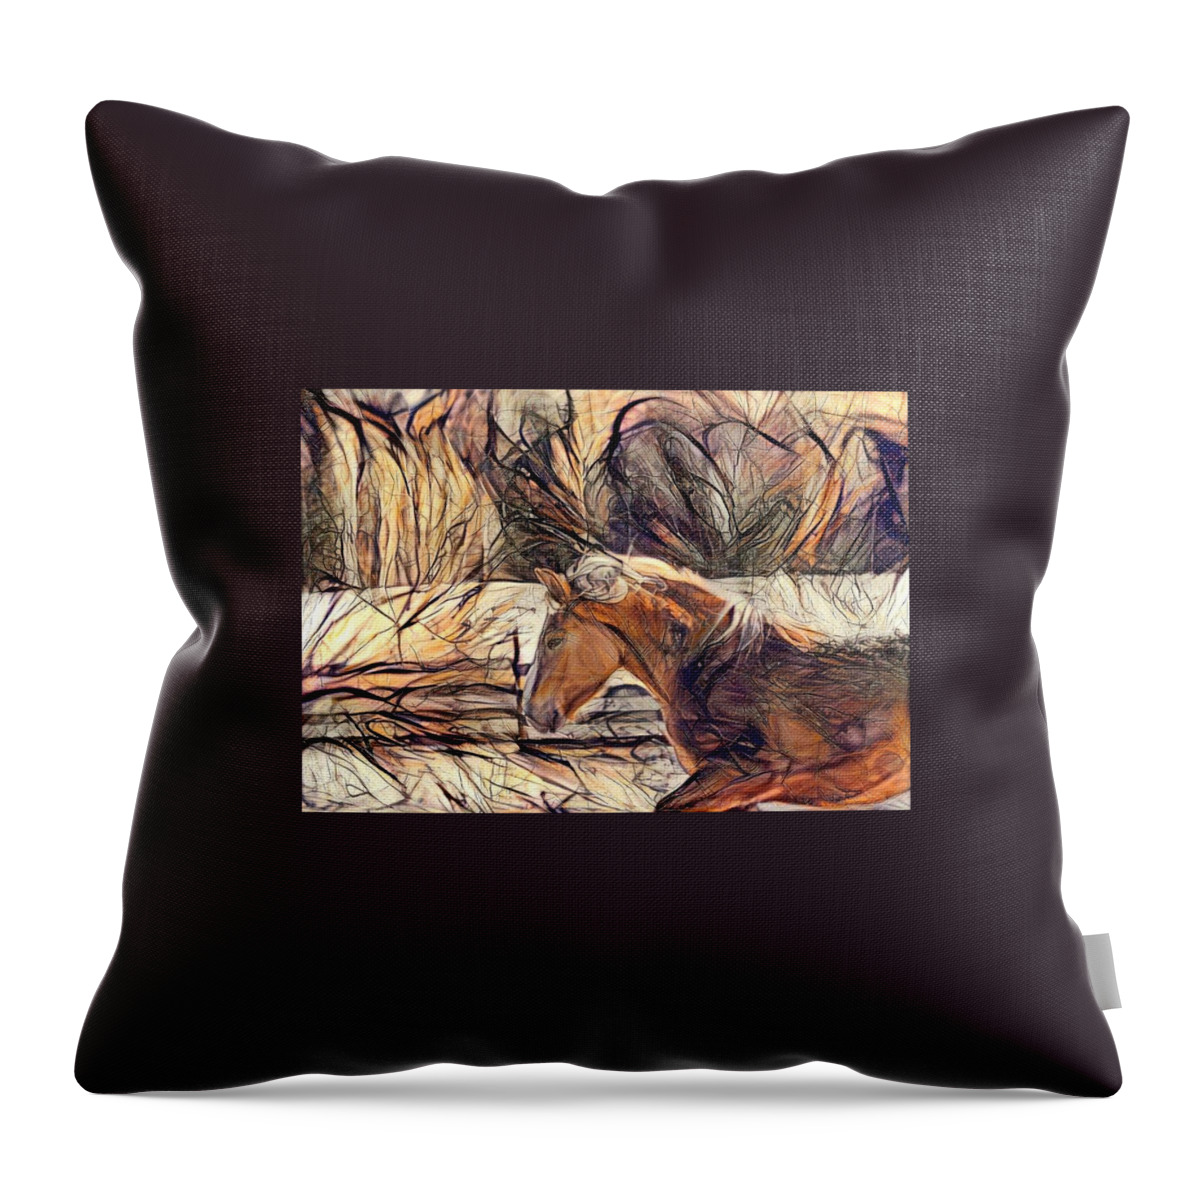 Palomino Throw Pillow featuring the digital art Young Prince 1 by Listen To Your Horse